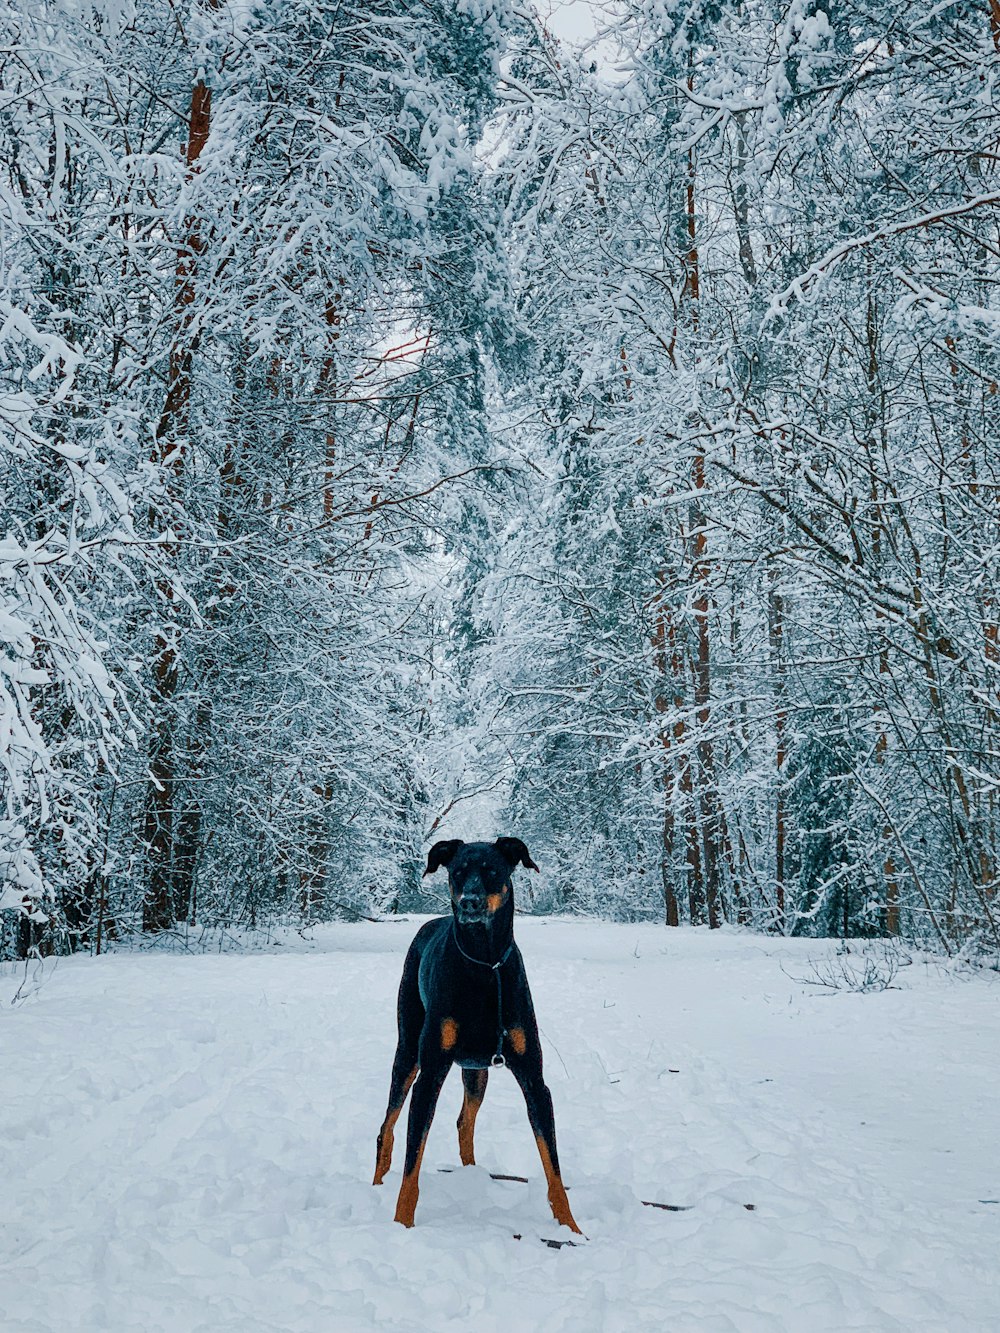 black and tan short coat medium dog on snow covered ground near trees during daytime